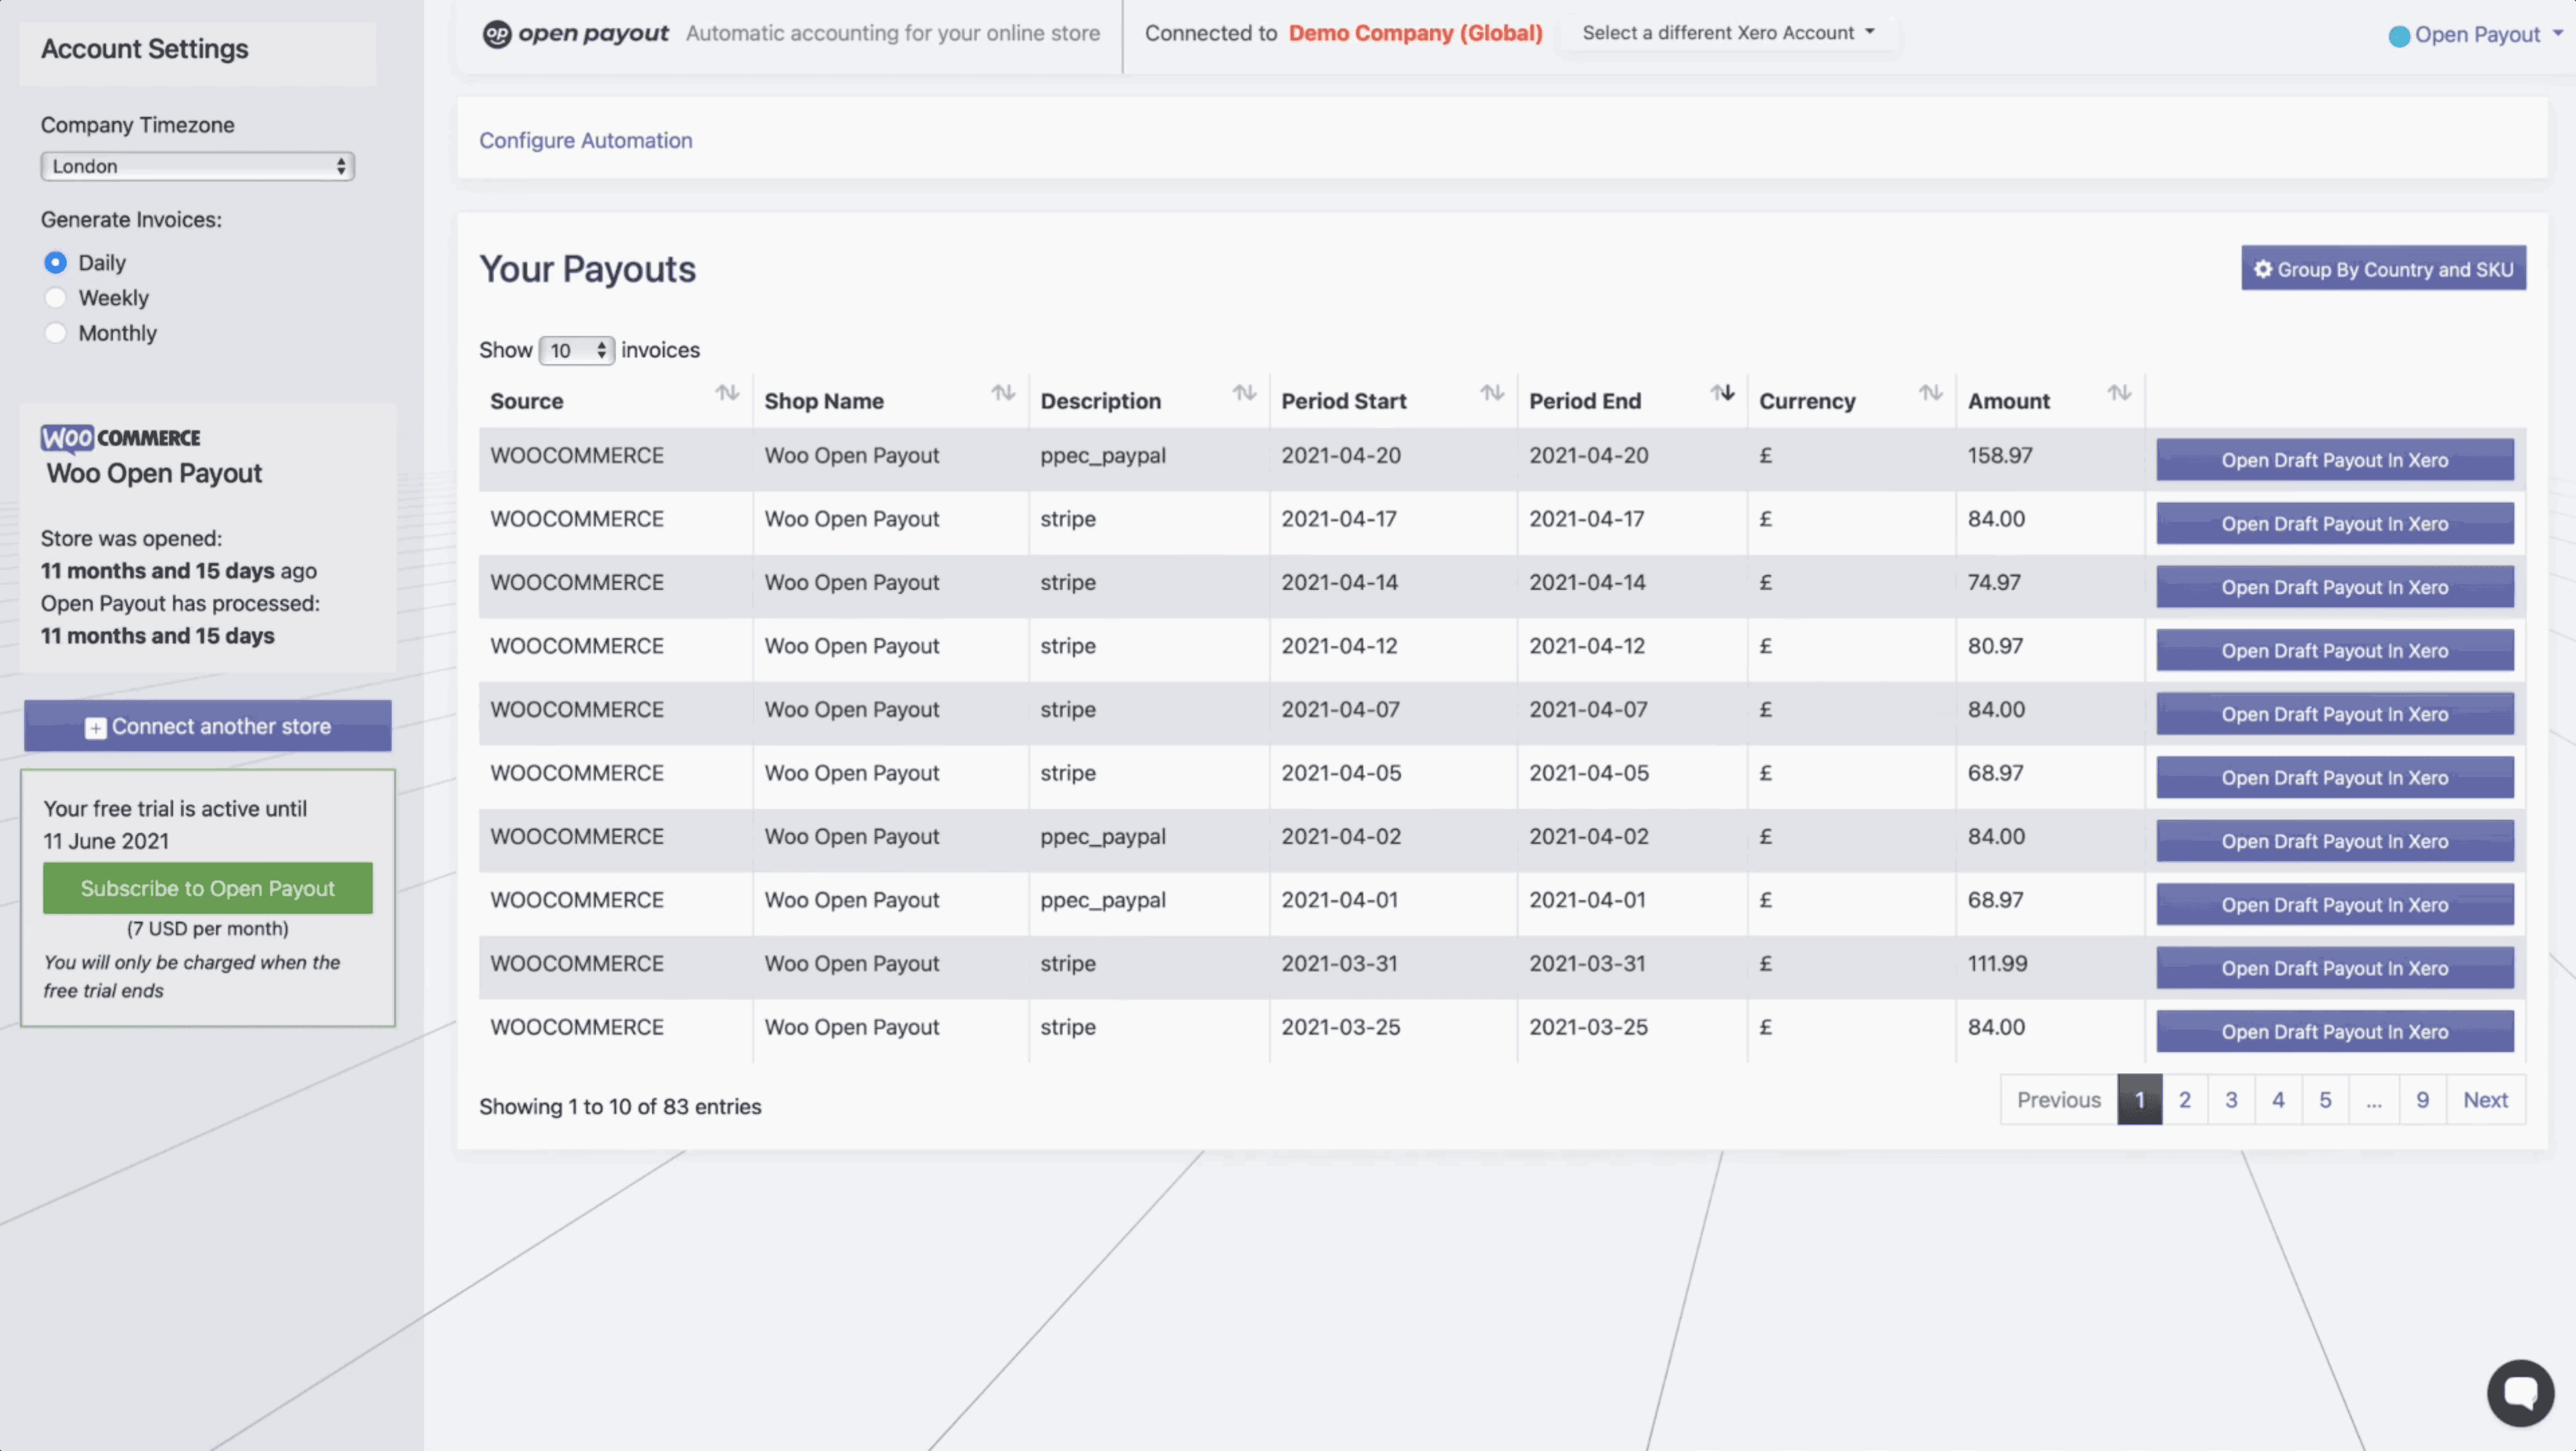 A picture of the Open Payout dashboard